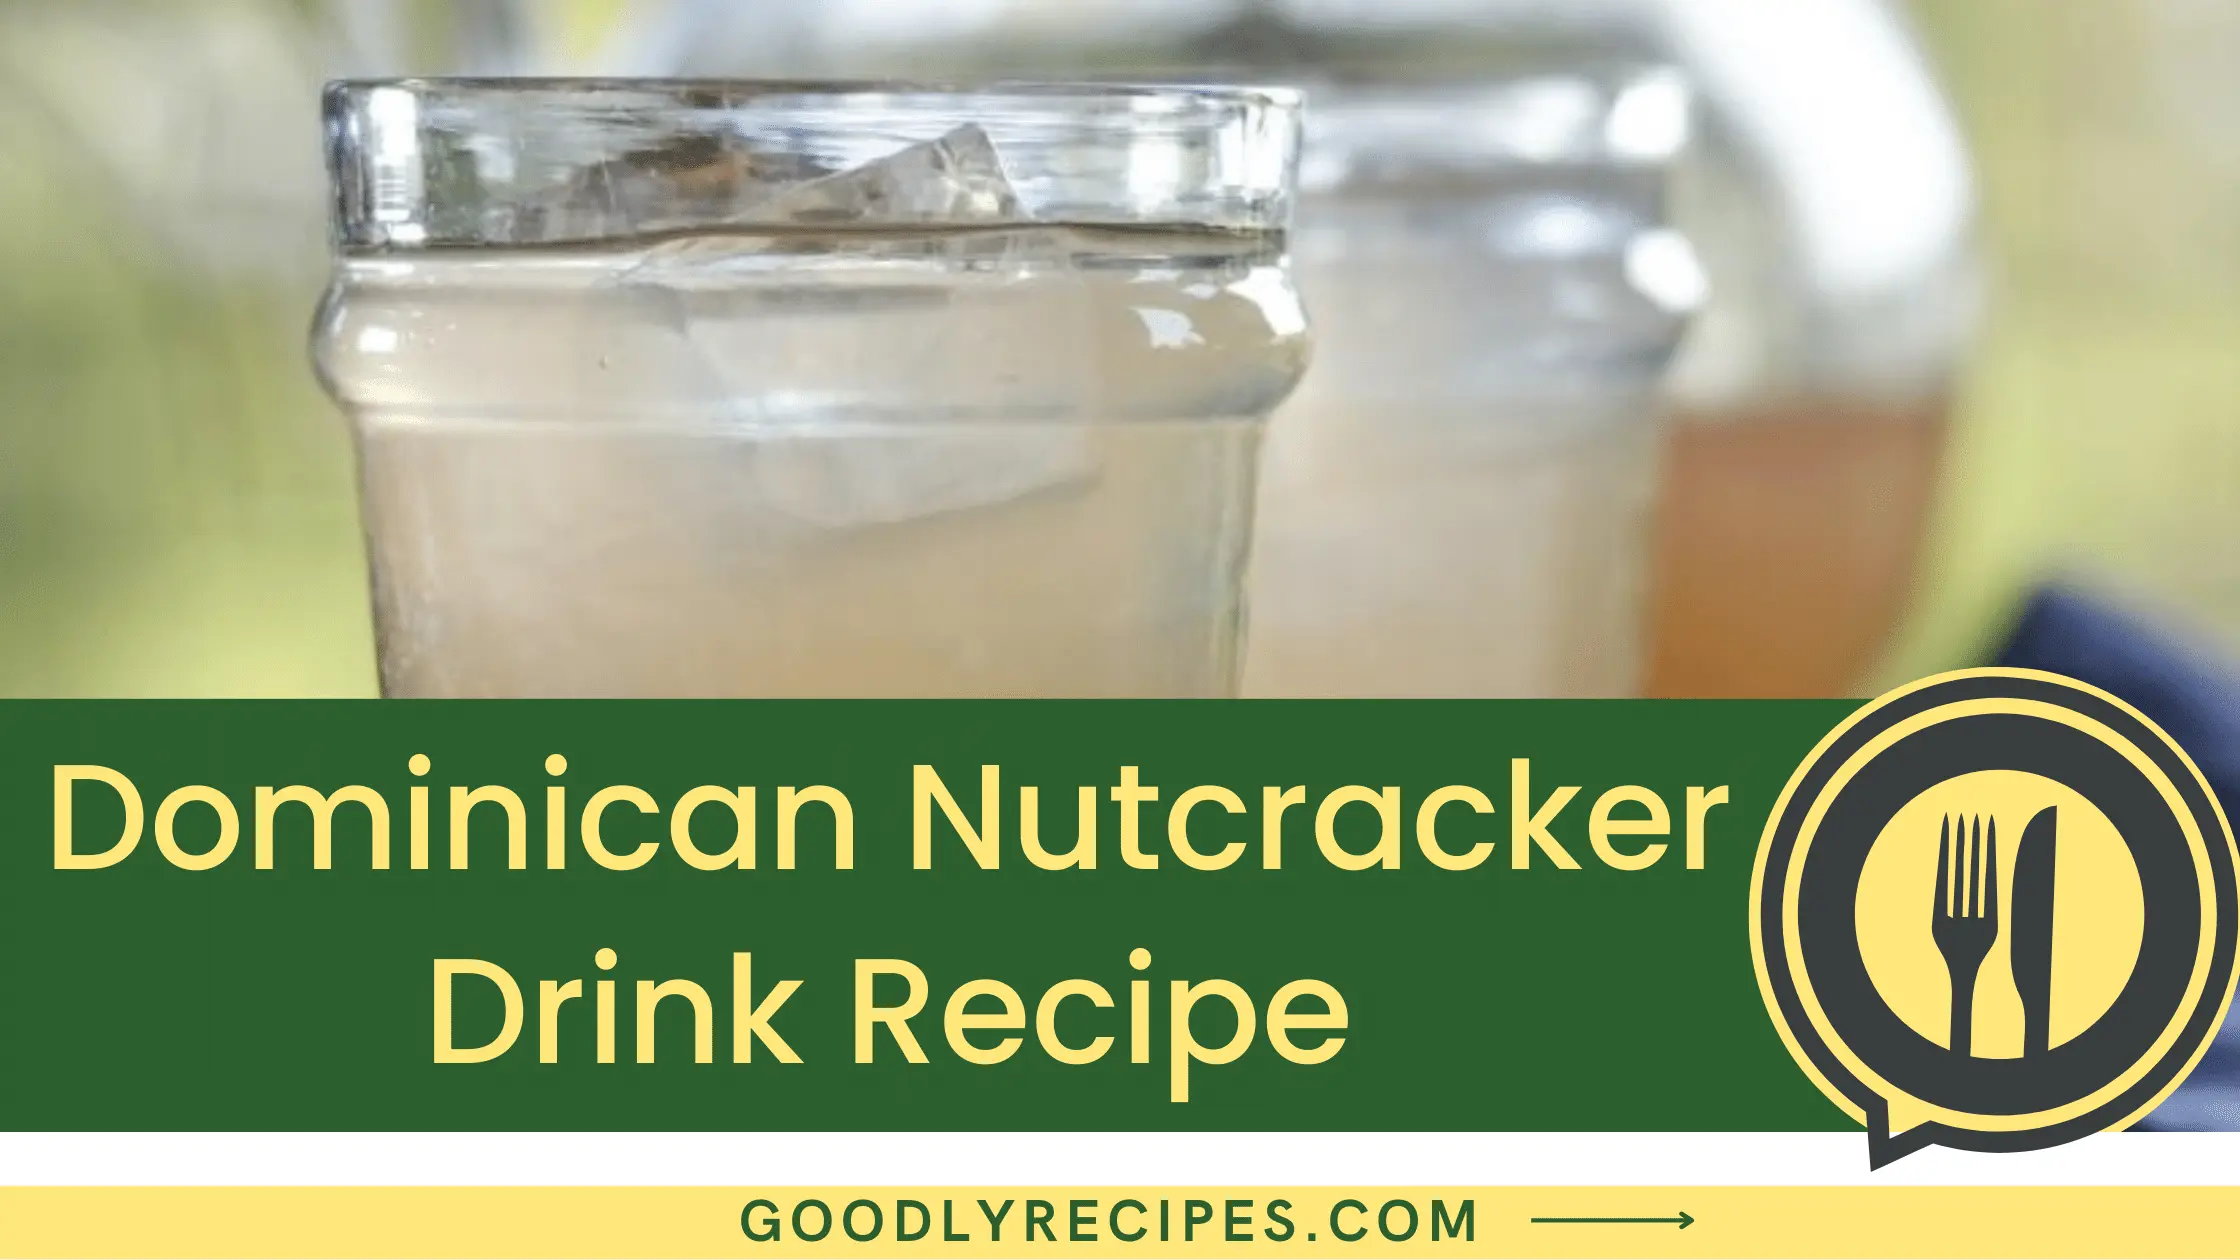 What is the Dominican Nutcracker drink?